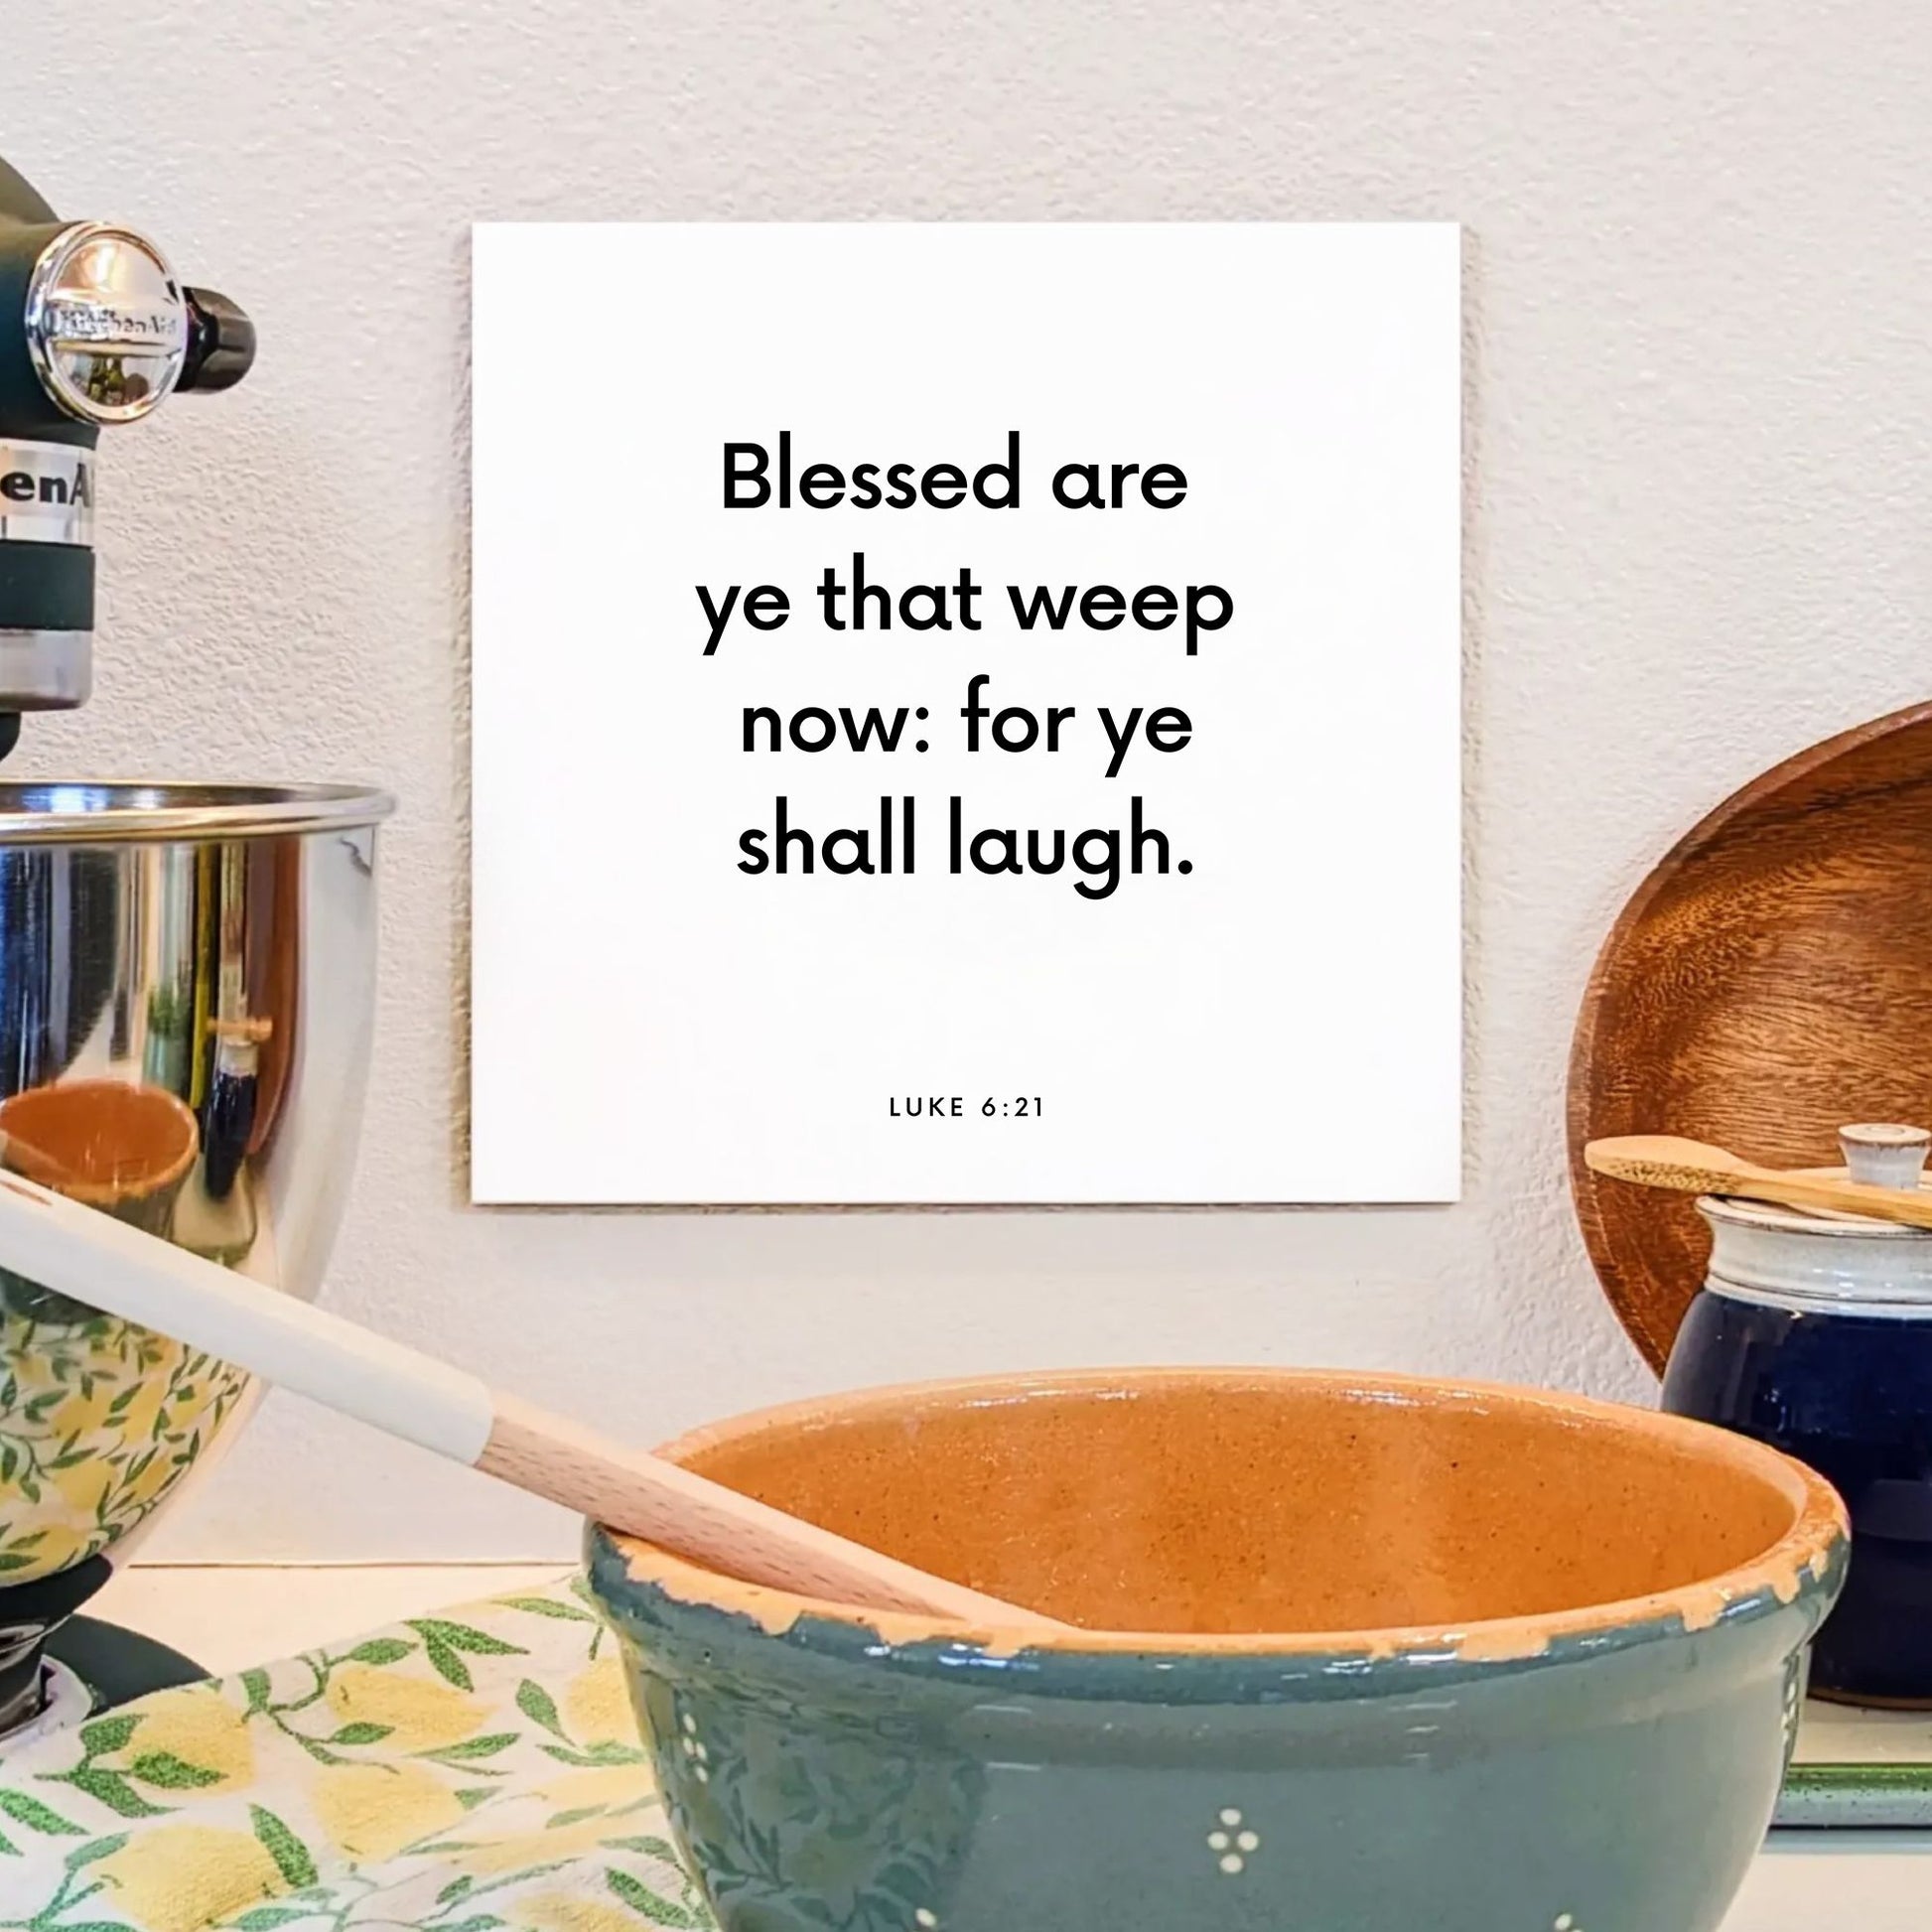 Kitchen mouting of the scripture tile for Luke 6:21 - "Blessed are ye that weep now: for ye shall laugh"